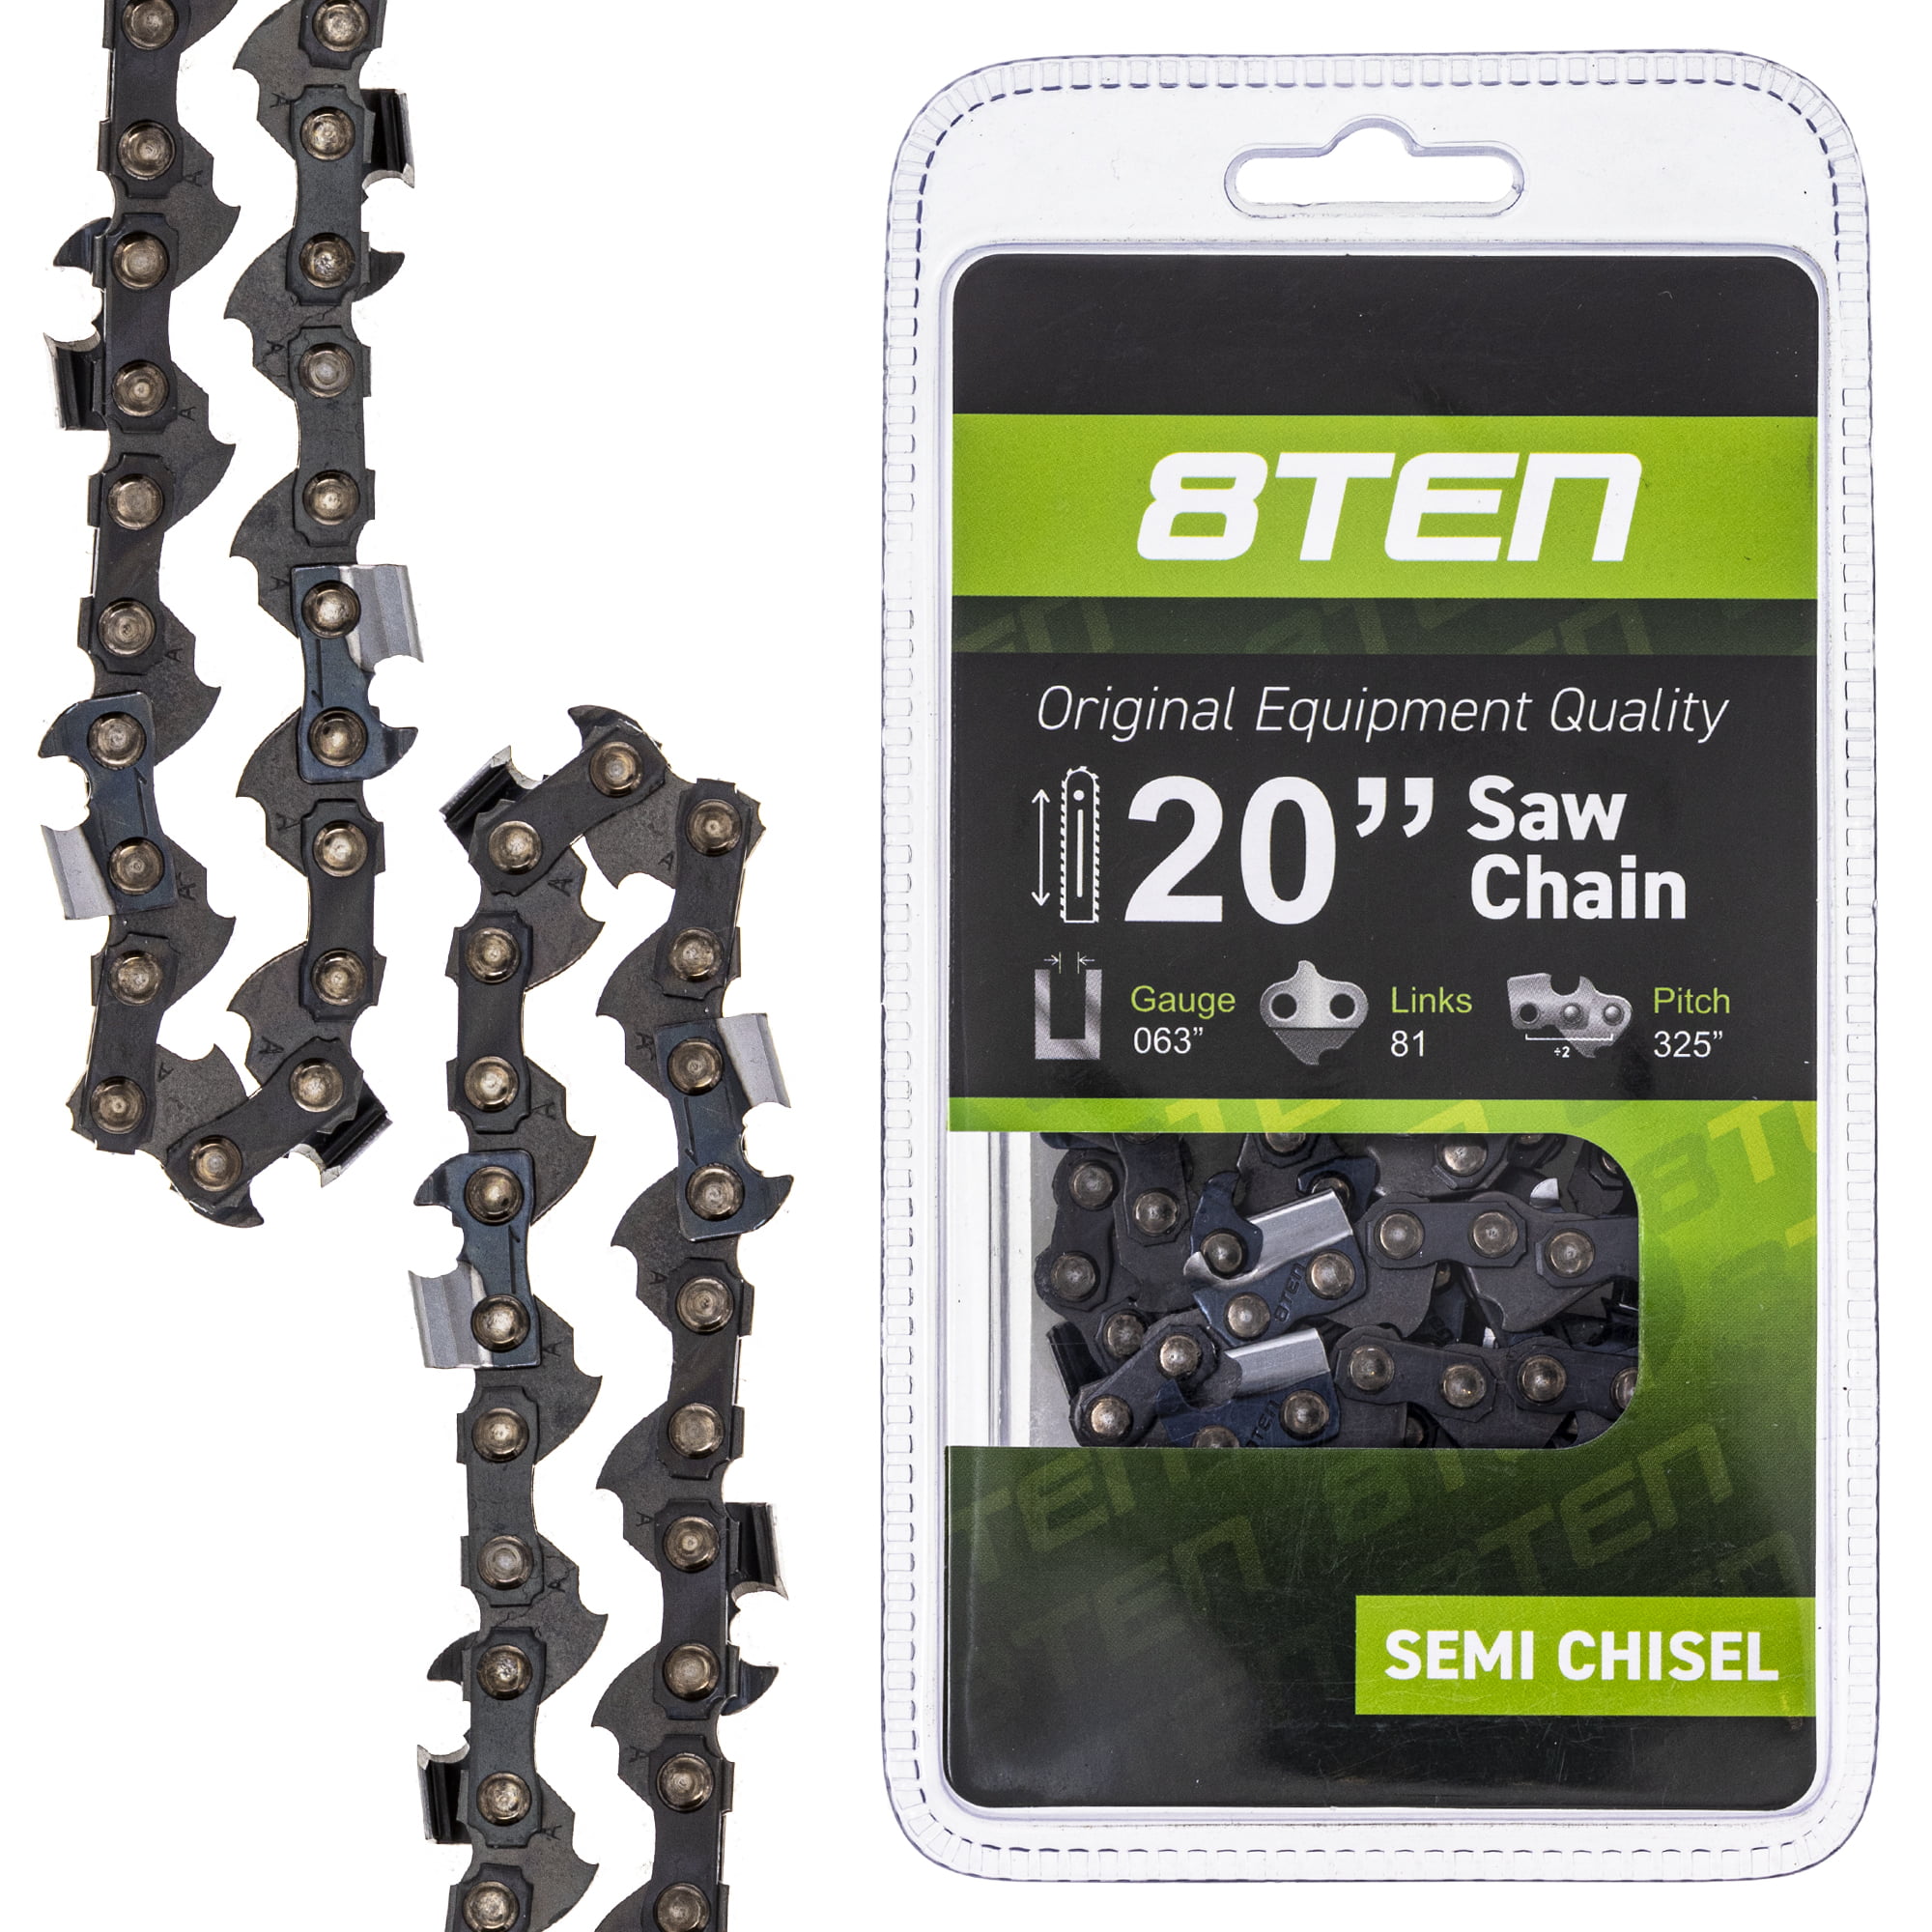 34 MS290 2-Pack Replacement 20-Inch L81 22BPX Chainsaw Chain for Stihl 26RM3 81 